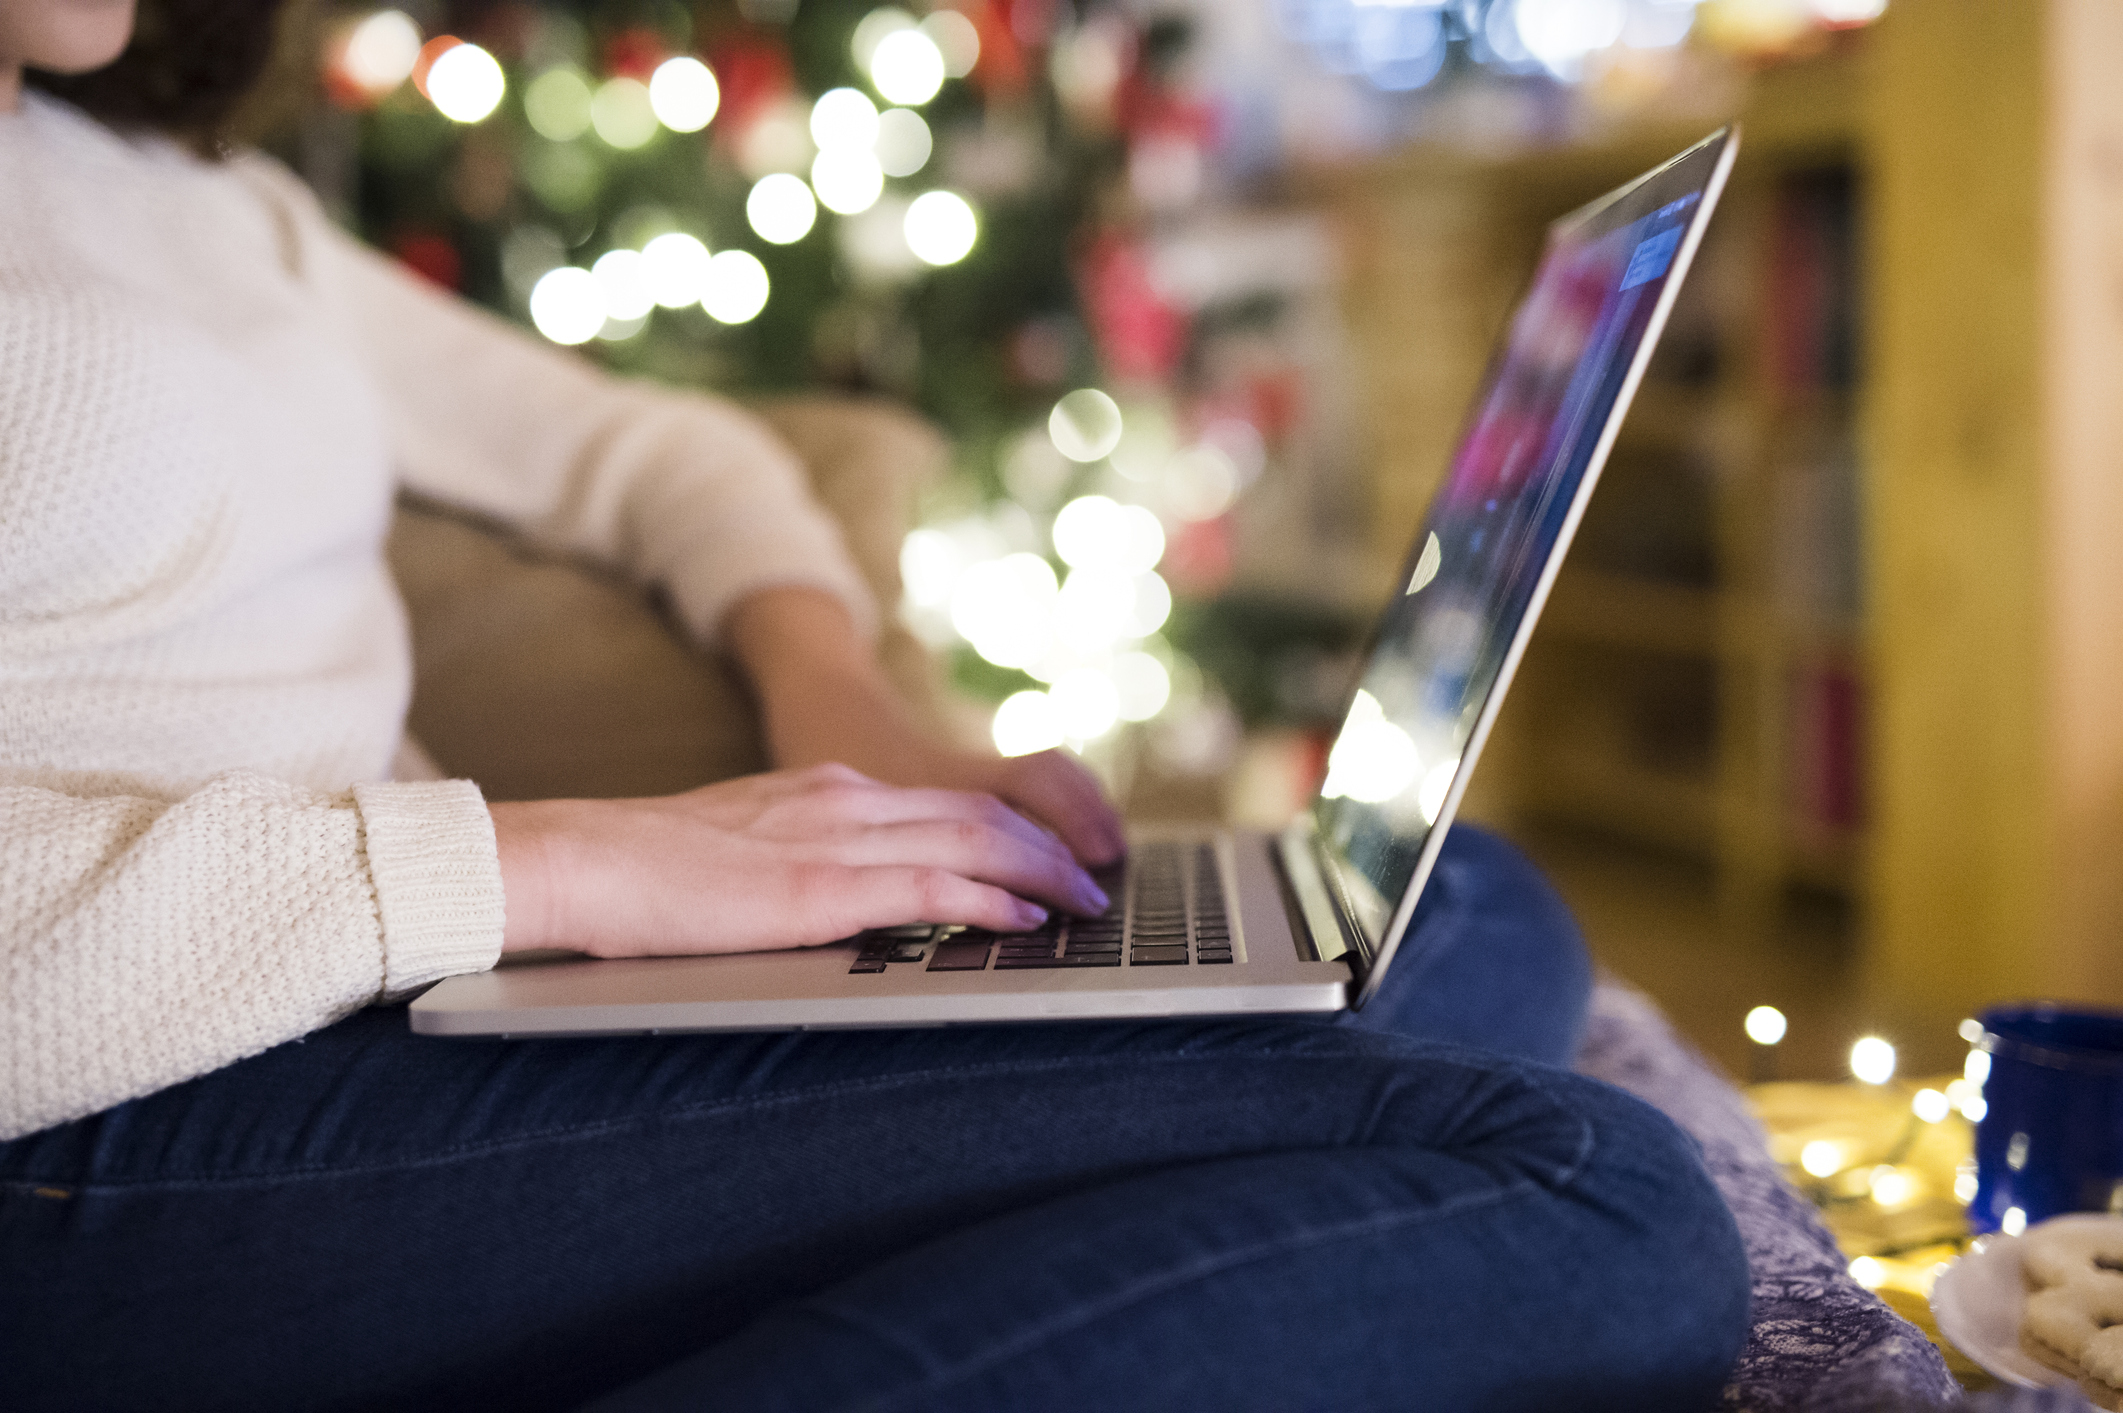 How to Avoid Falling Victim to Online Christmas Scams